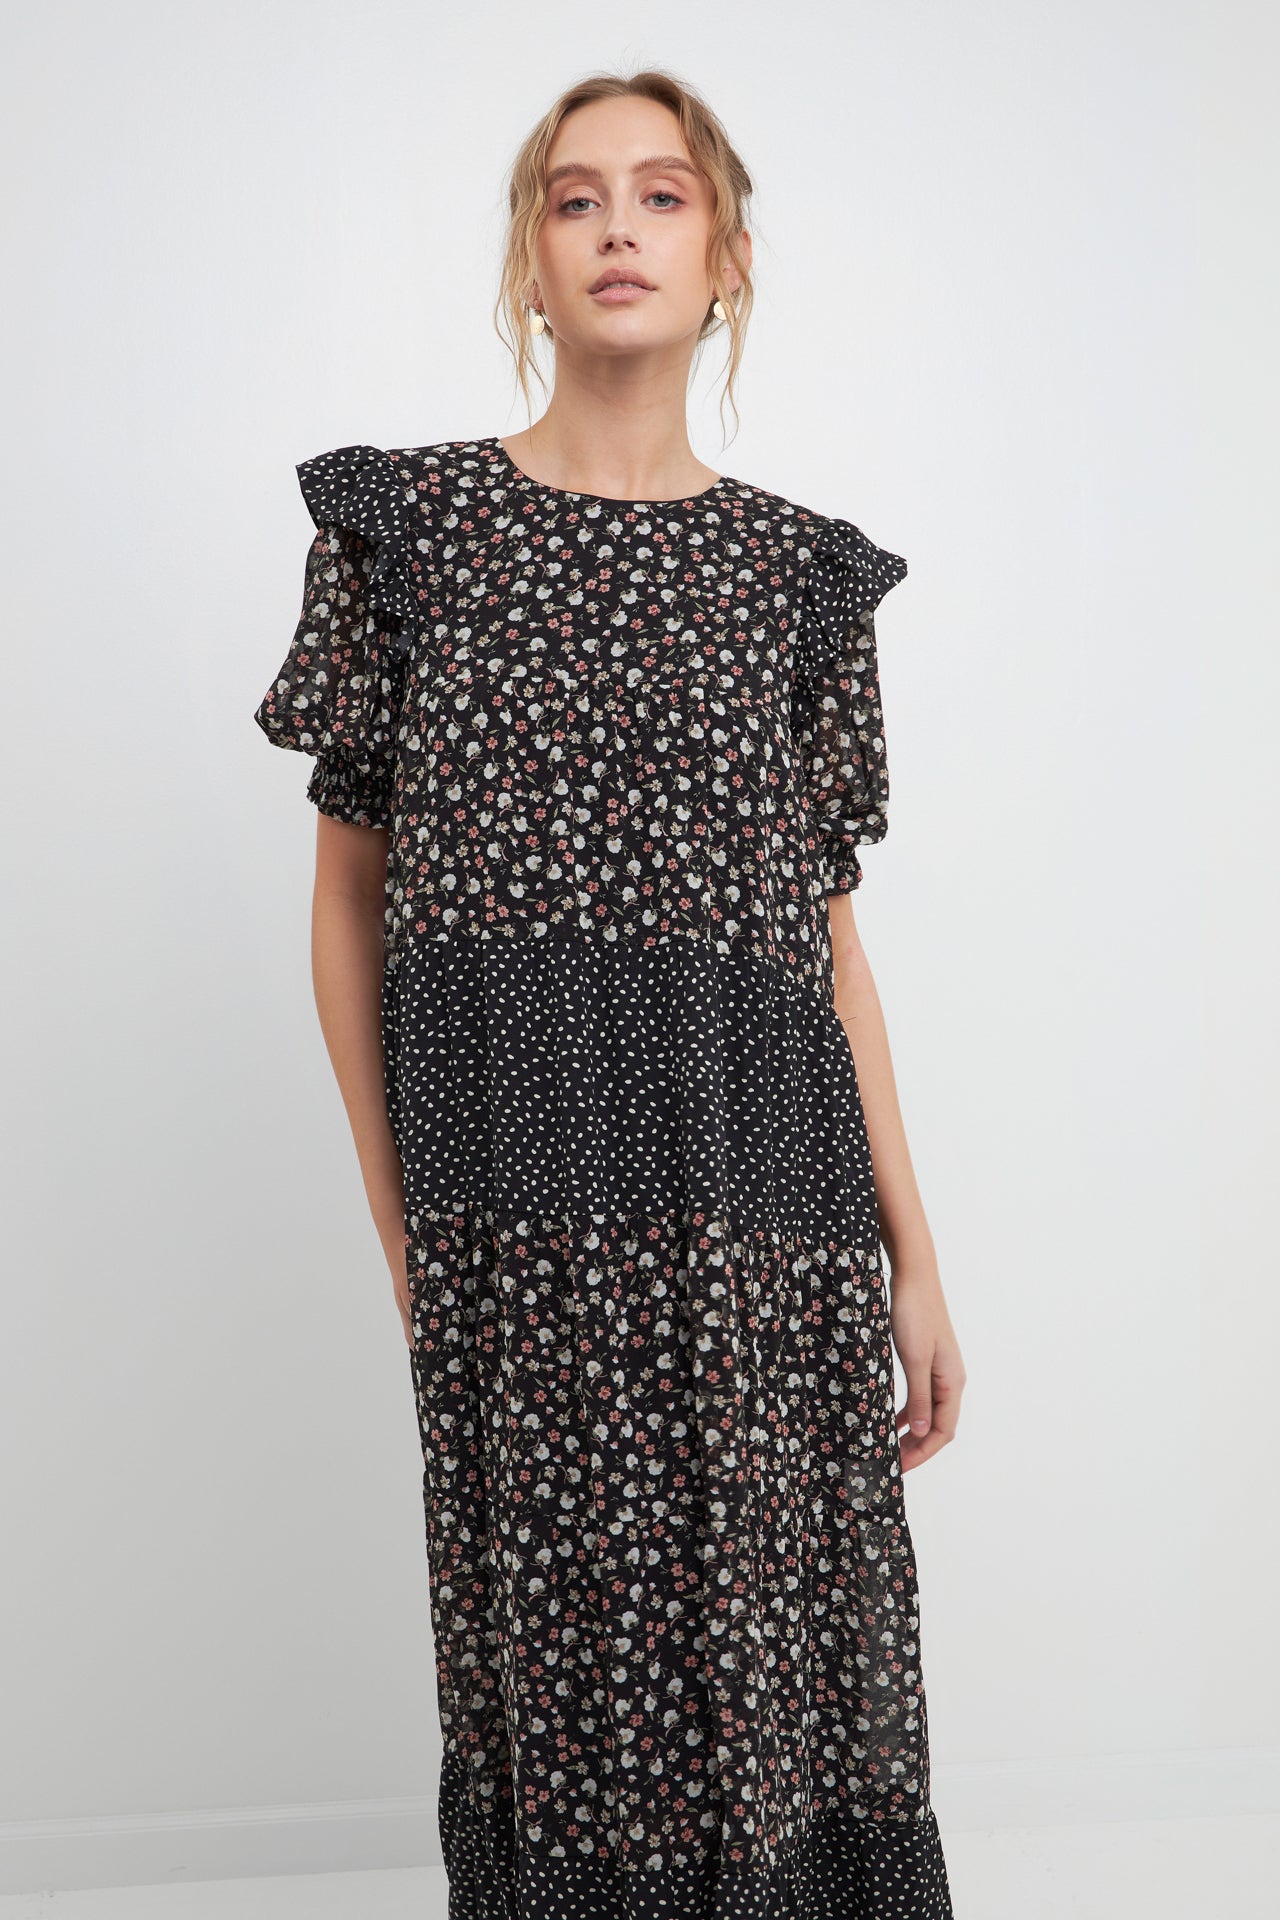 FREE THE ROSES - Floral & Dot Print Maxi Dress - DRESSES available at Objectrare